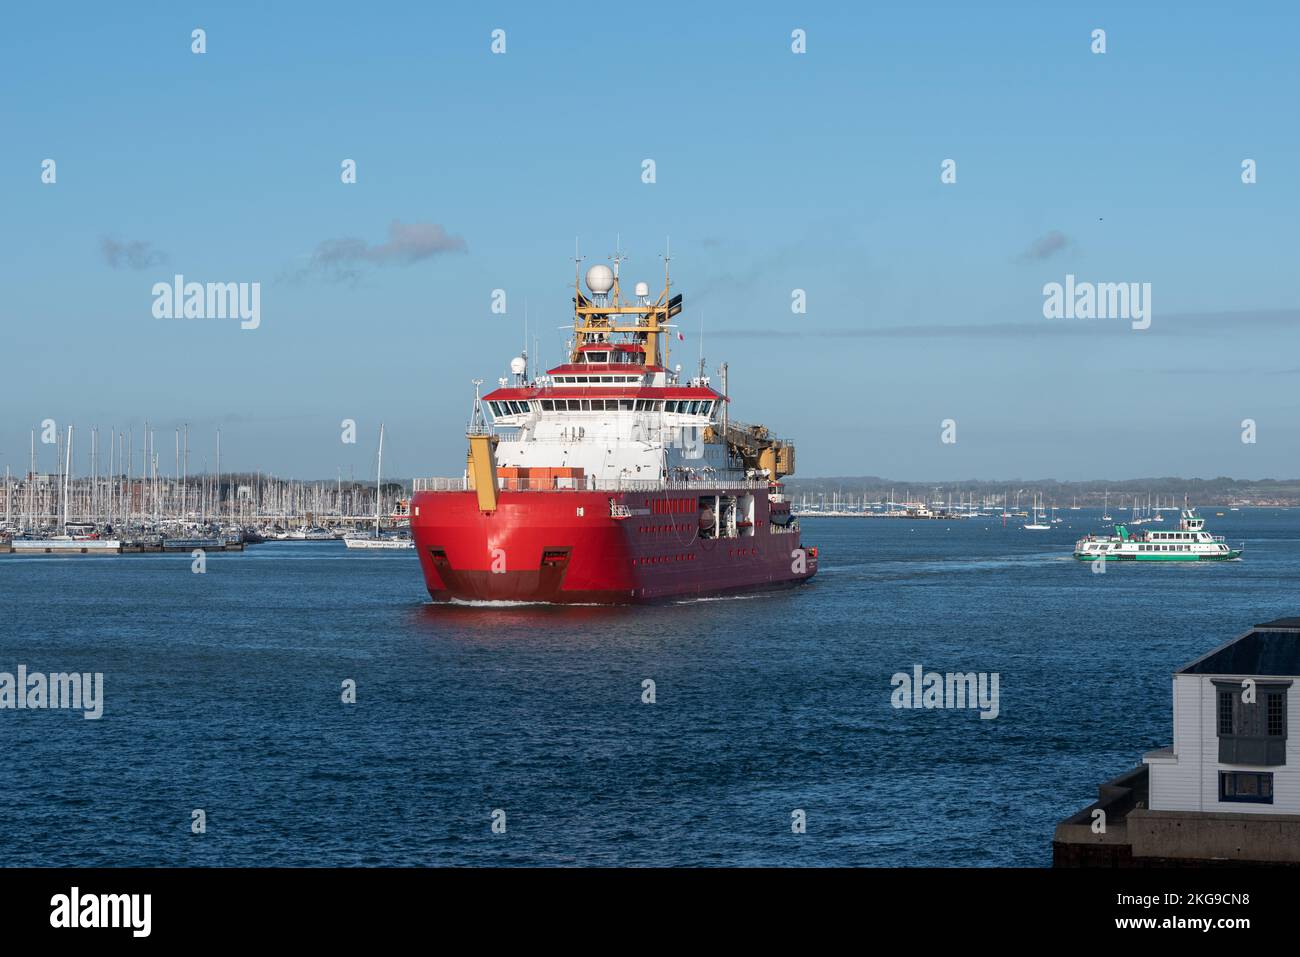 RRS Sir David Attenborough ship leaving Portsmouth harbour in England on it's way to Antarctica for research. Stock Photo